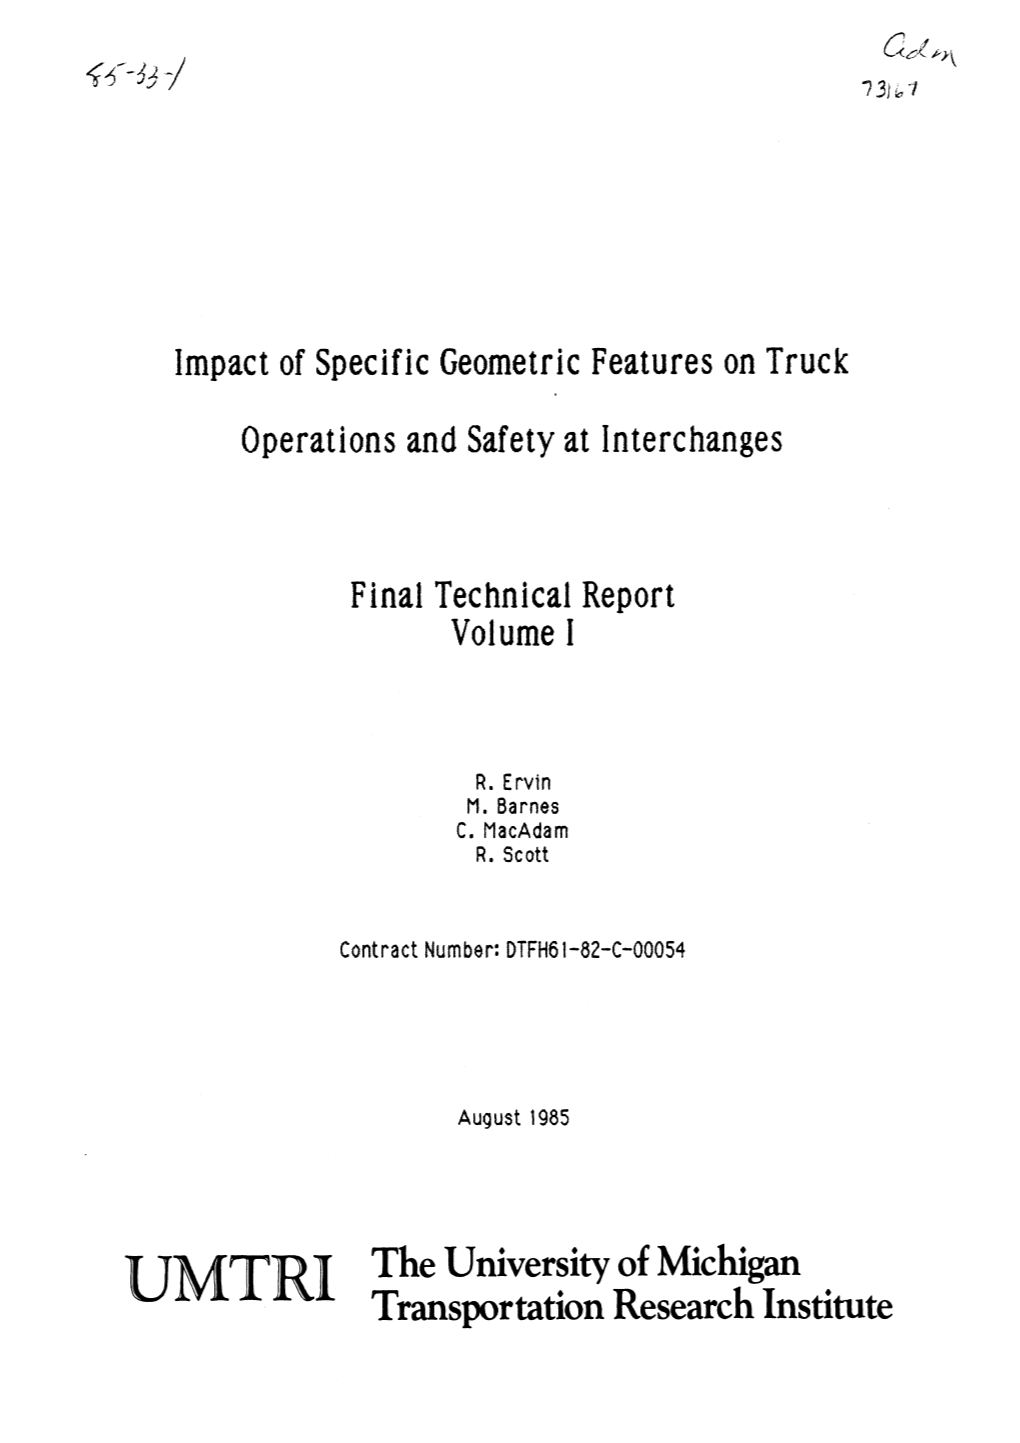 Impact of Specific Geometric Features on Truck Operations and Safety at Interchanges